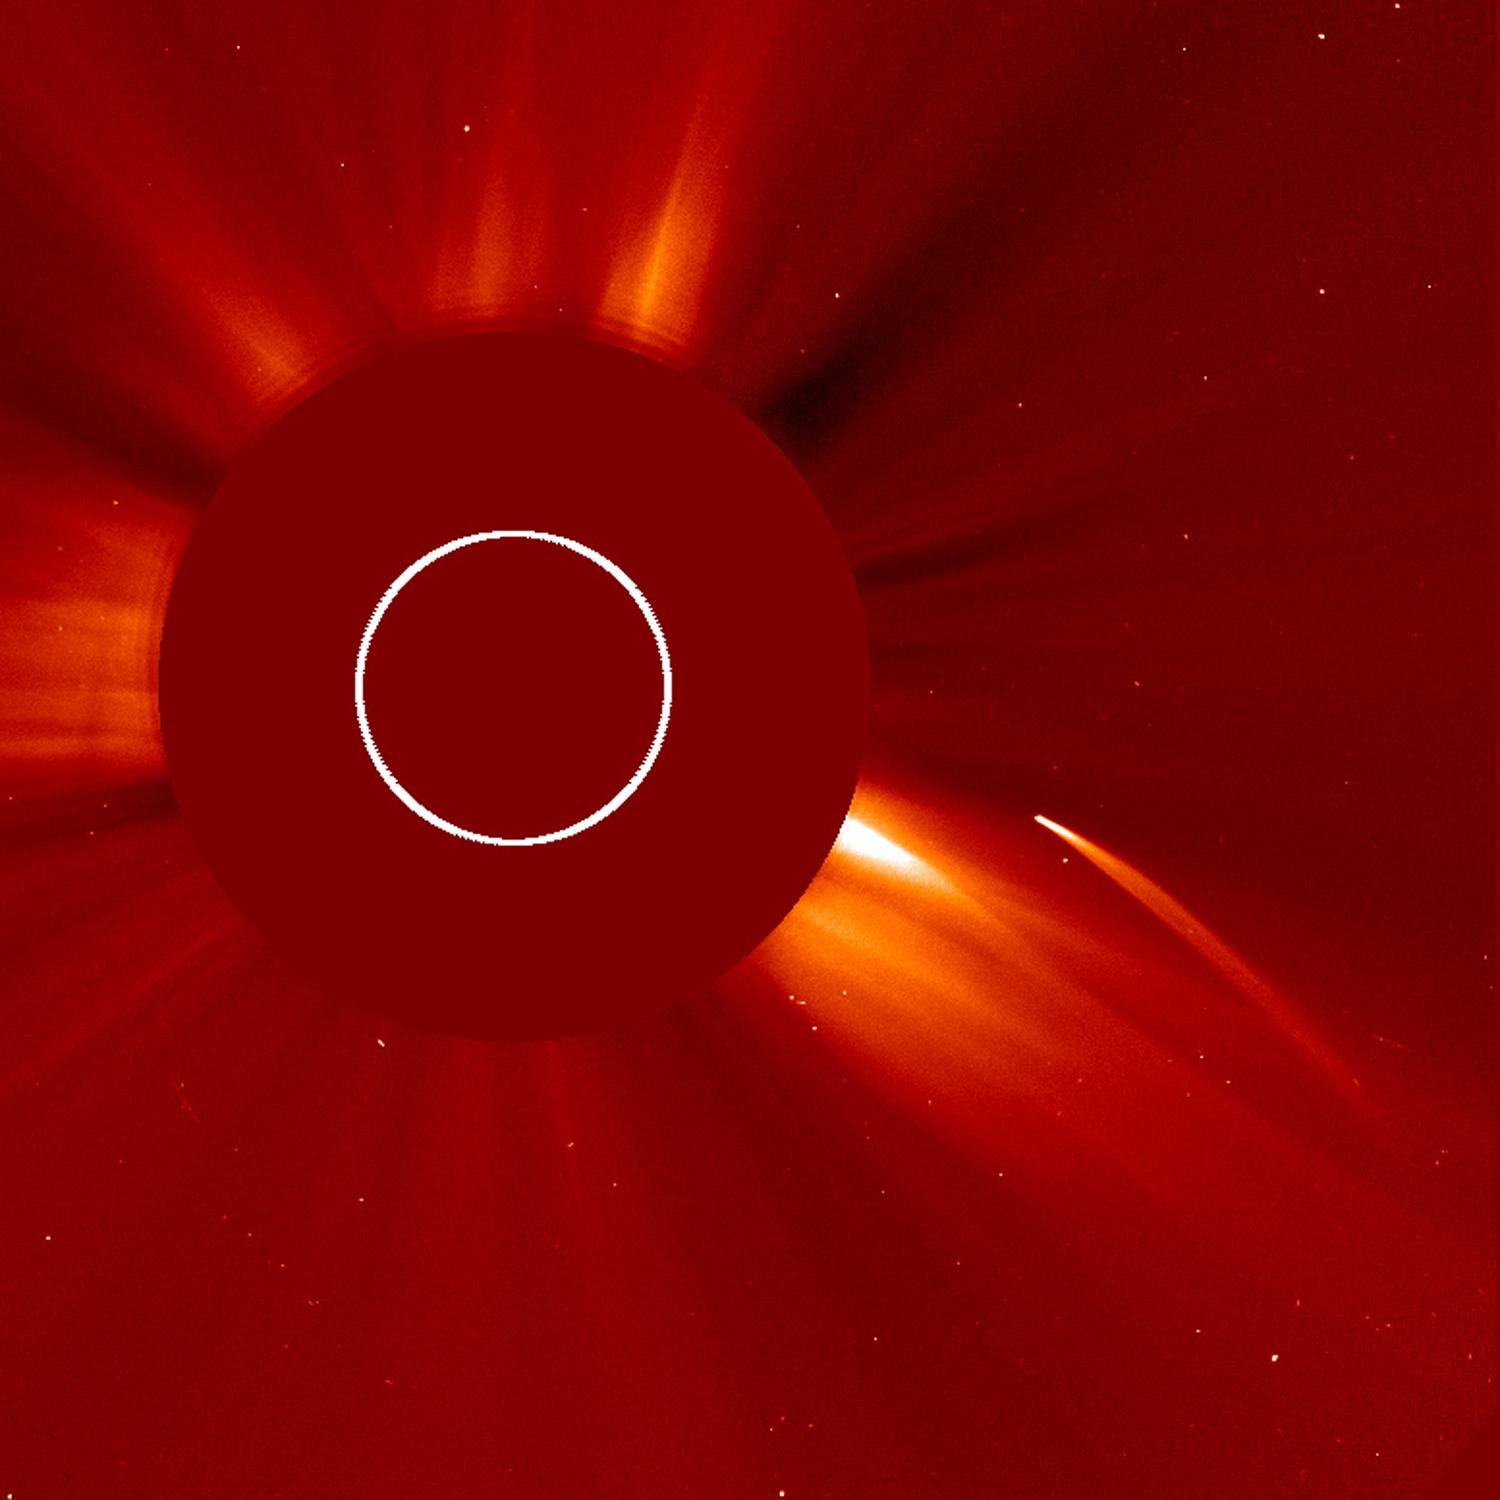 SOHO saw this sun grazing comet as it dived toward the sun on July 5 and July 6, 2011. 